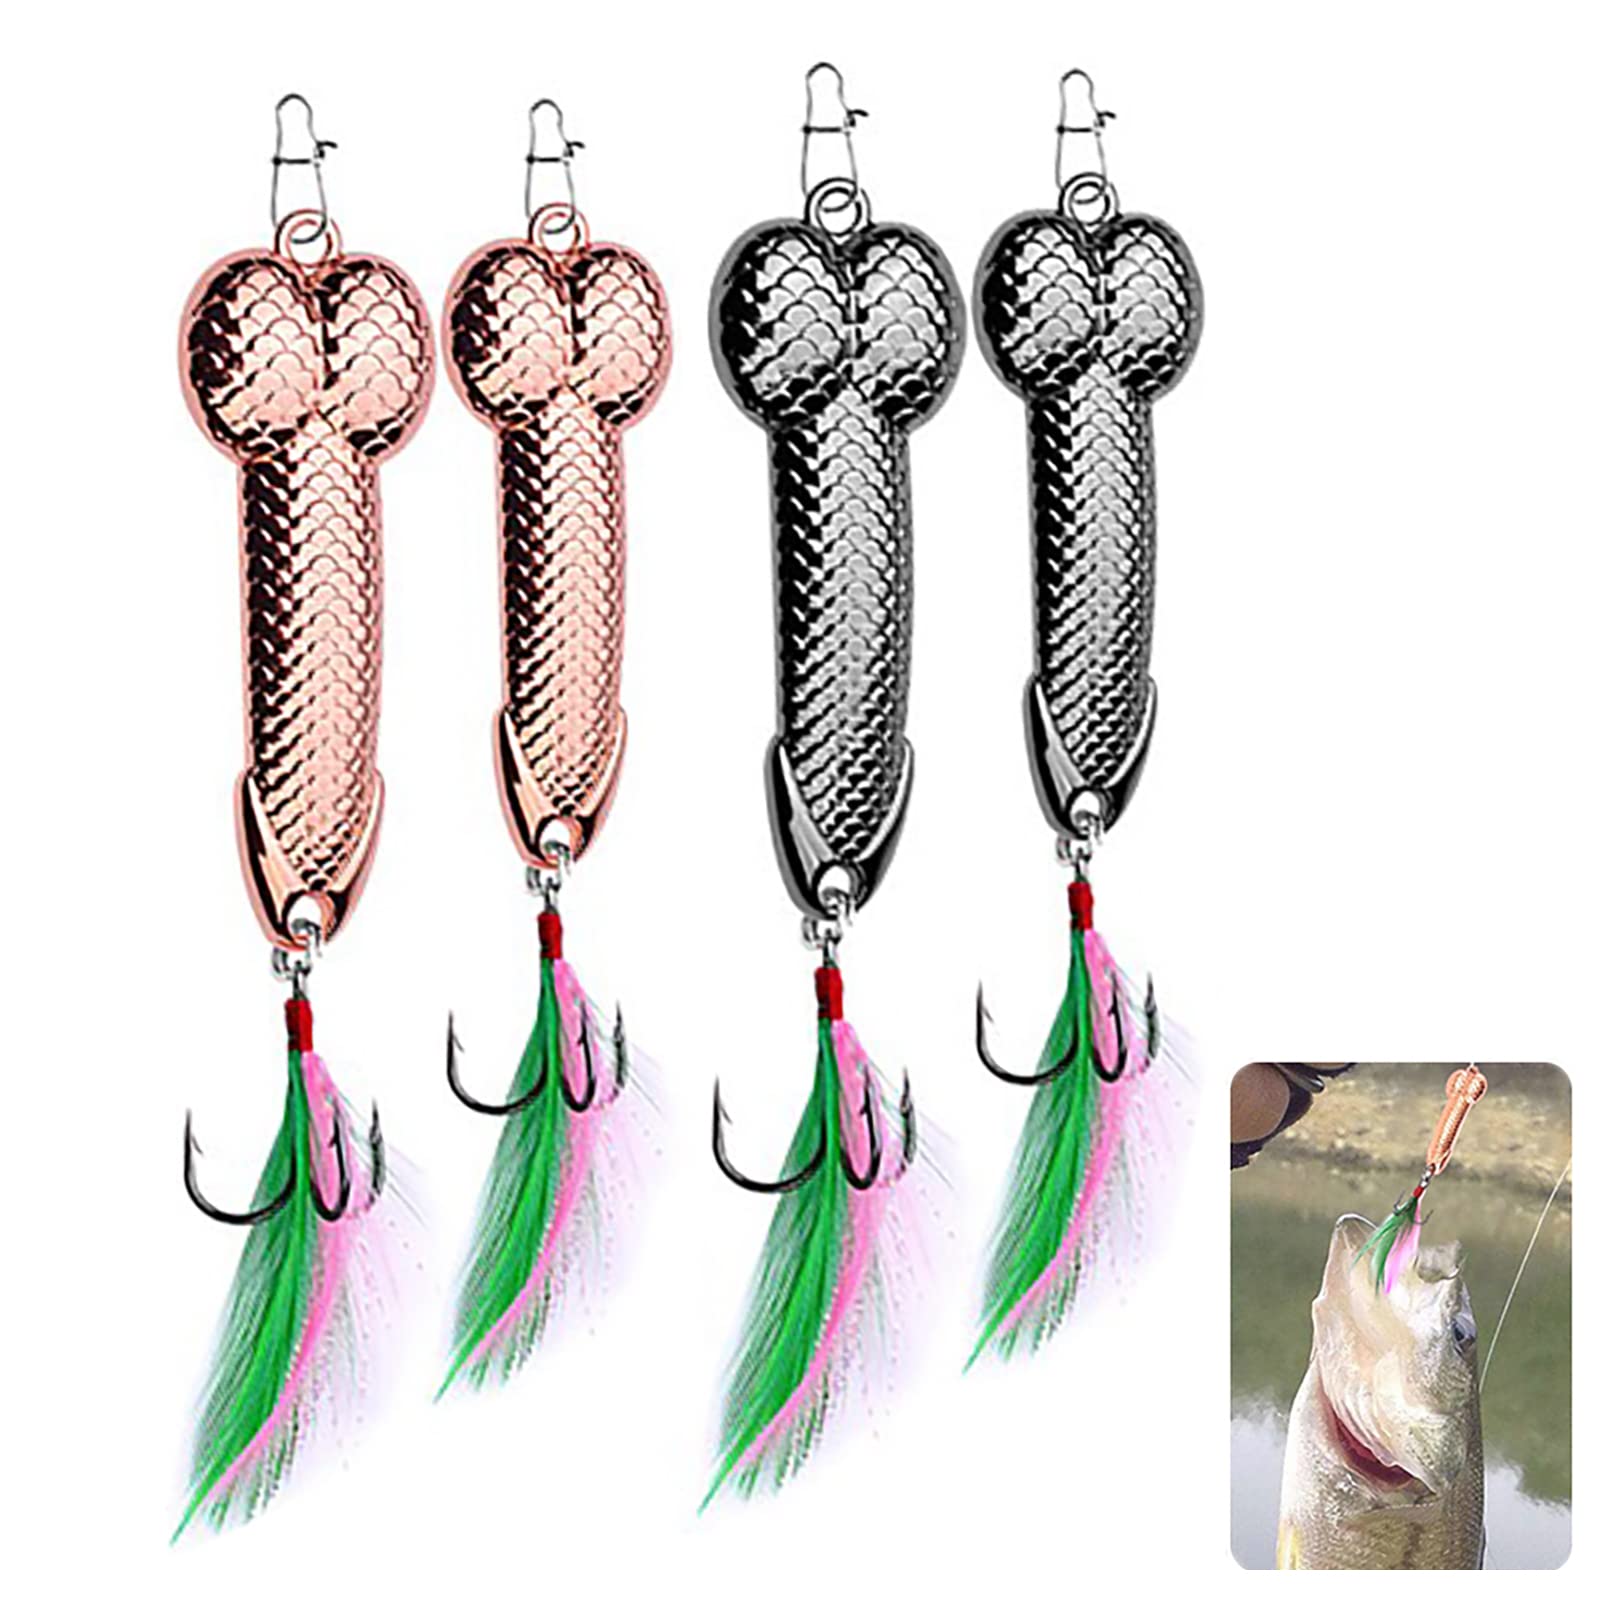 10PC Metal Fishing Sequins Hooks Baits Feather Fishhook Tackle Tackle for  海外 即決 - スキル、知識